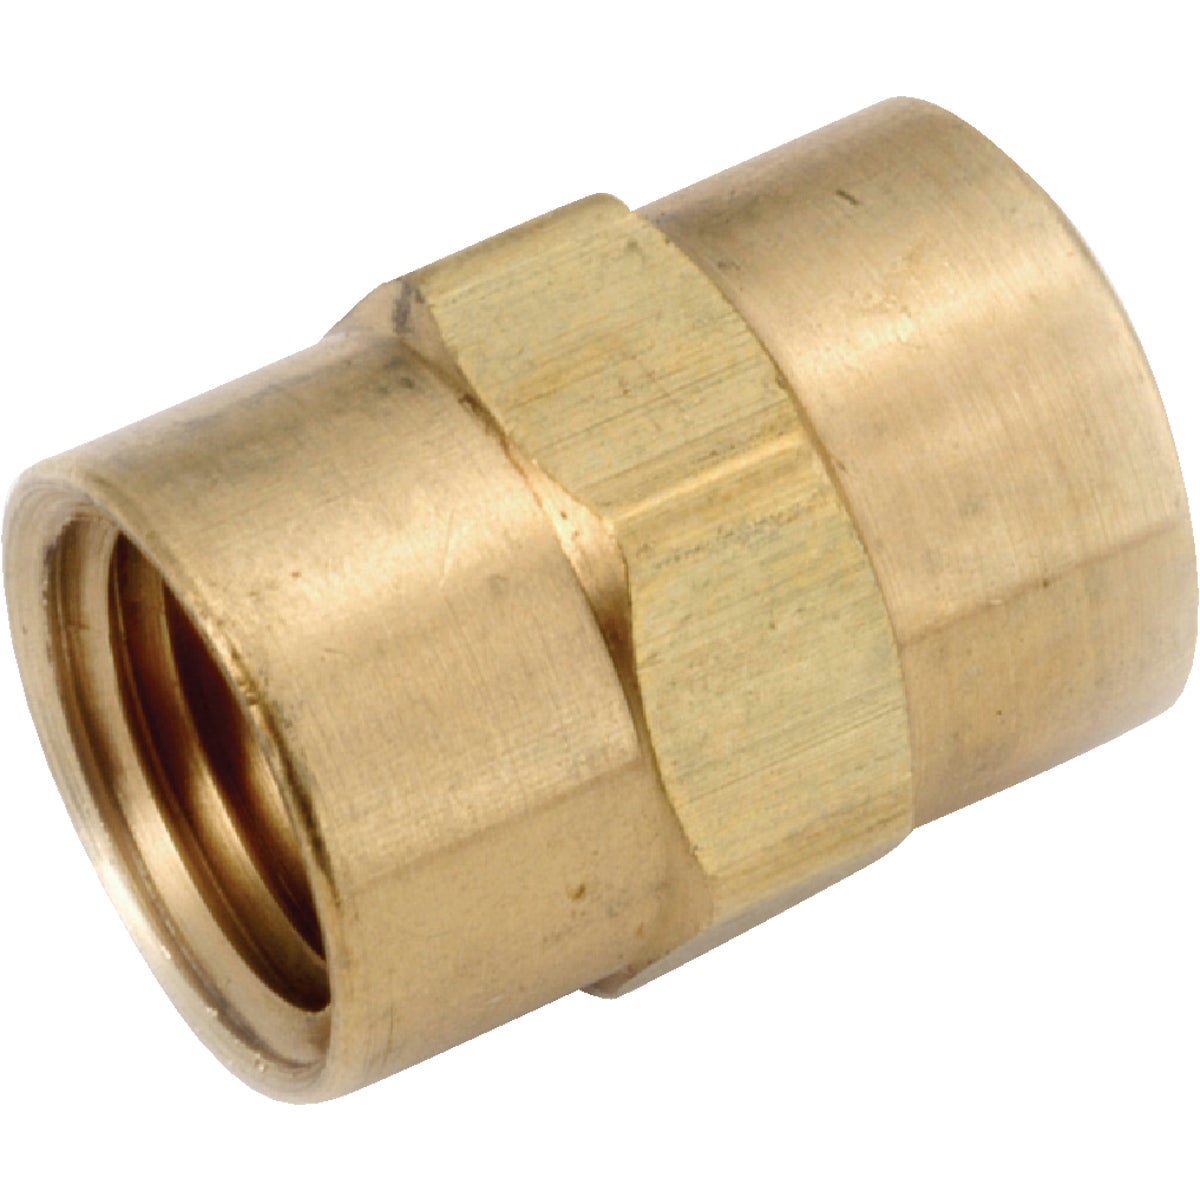 Anderson Metals 1/2 In. Yellow Brass Coupling